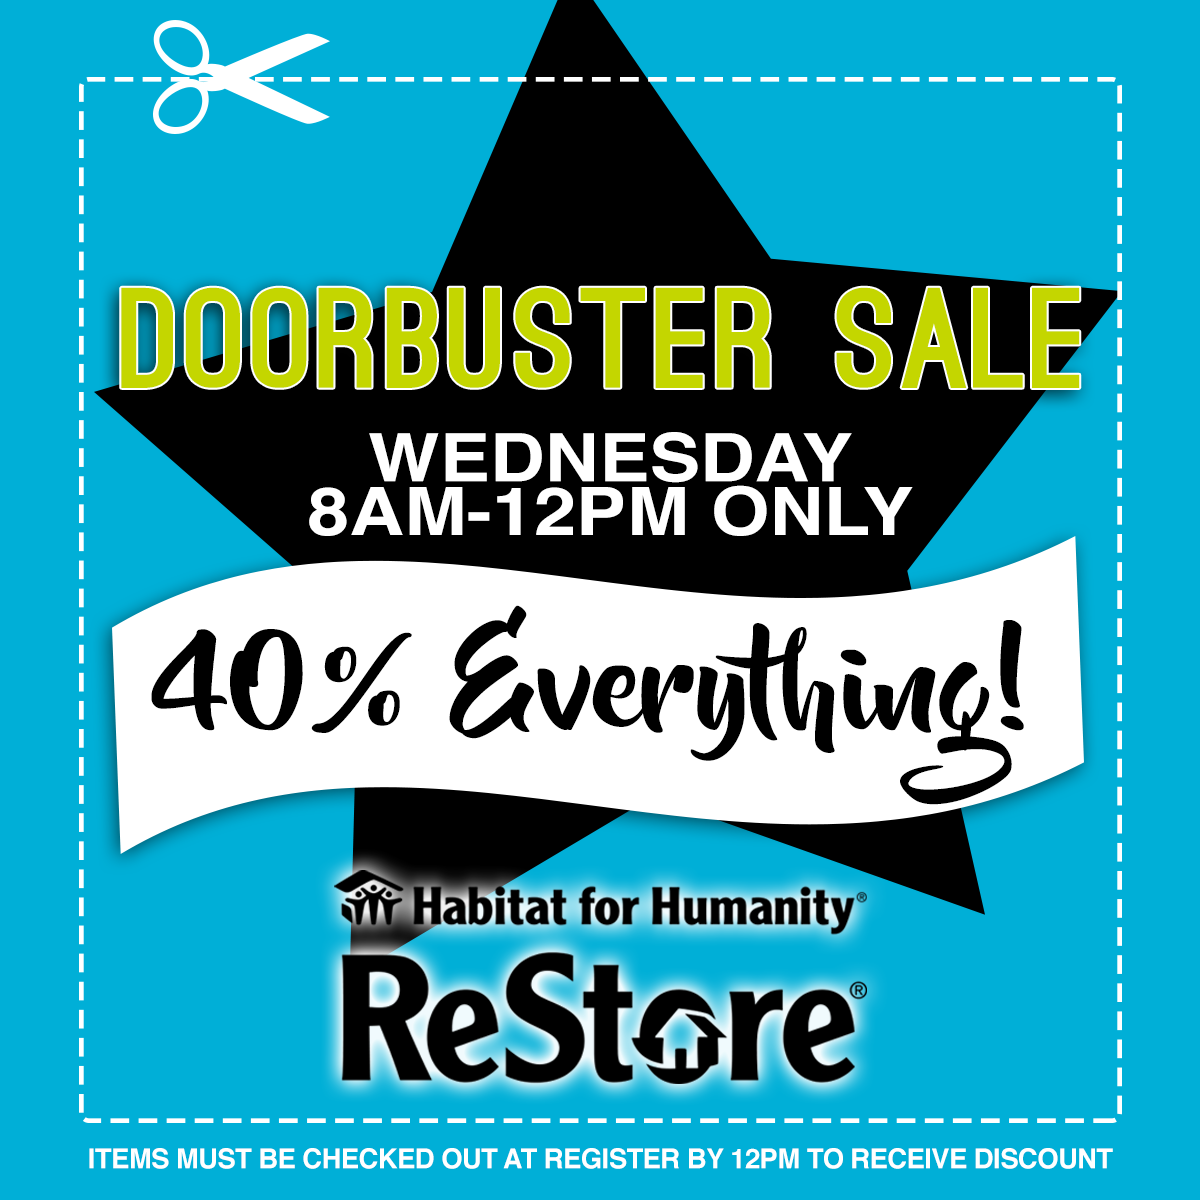 40% Off Everything Door Buster Sale 8am-12pm ONLY